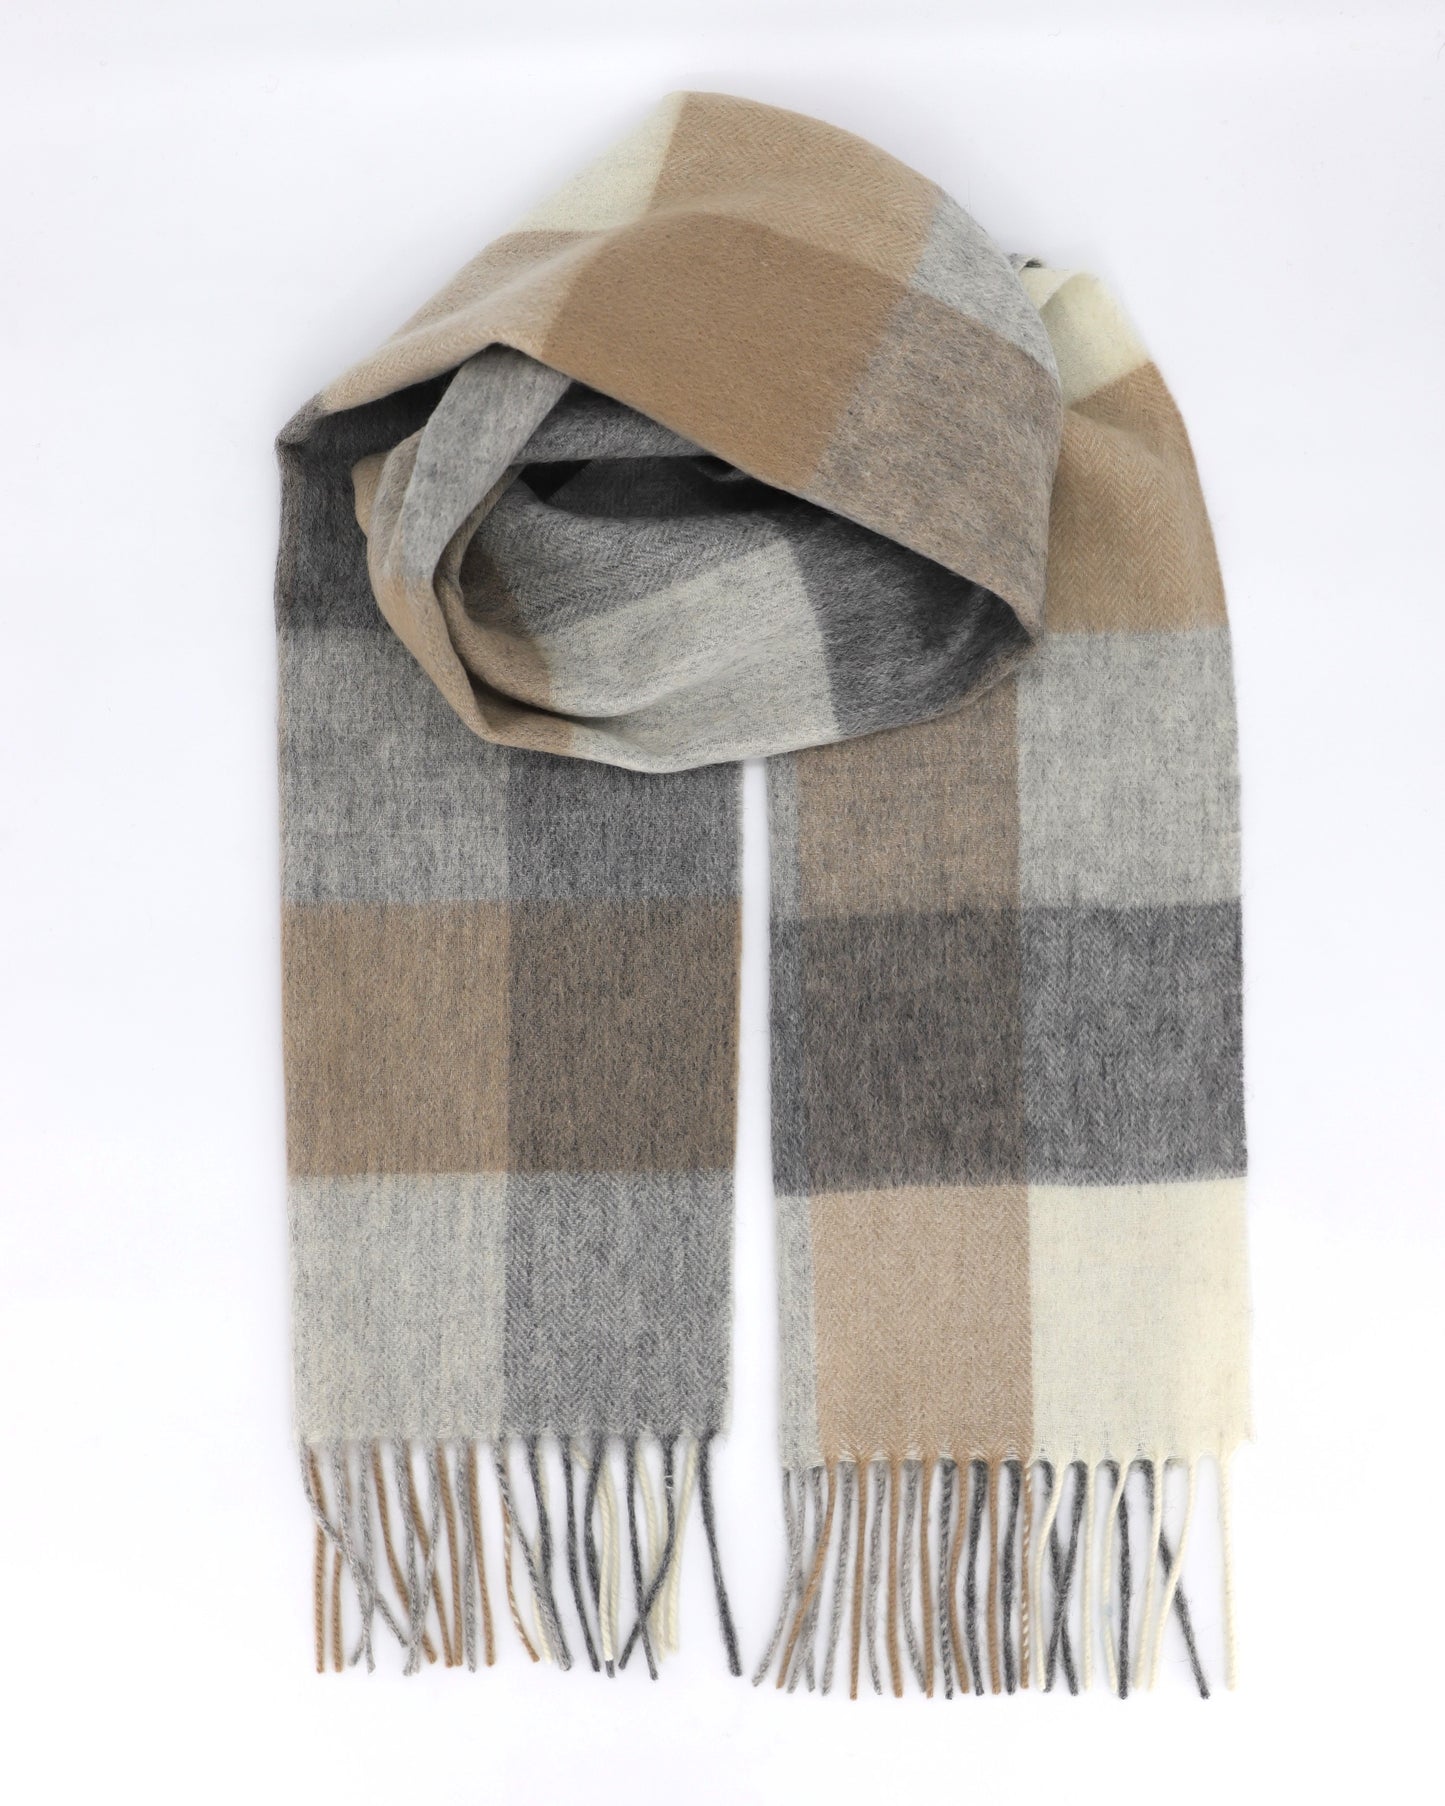 This Scarf is a finest 100% natural wool scarf in a classic checked pattern from Villanelle A luxurious accessory for women and made made from the softest natural wool for extreme comfort and warmth. It is made in a trendy combination of light grey, beige and creamy color. This product is sourced and manufactured in Poland.